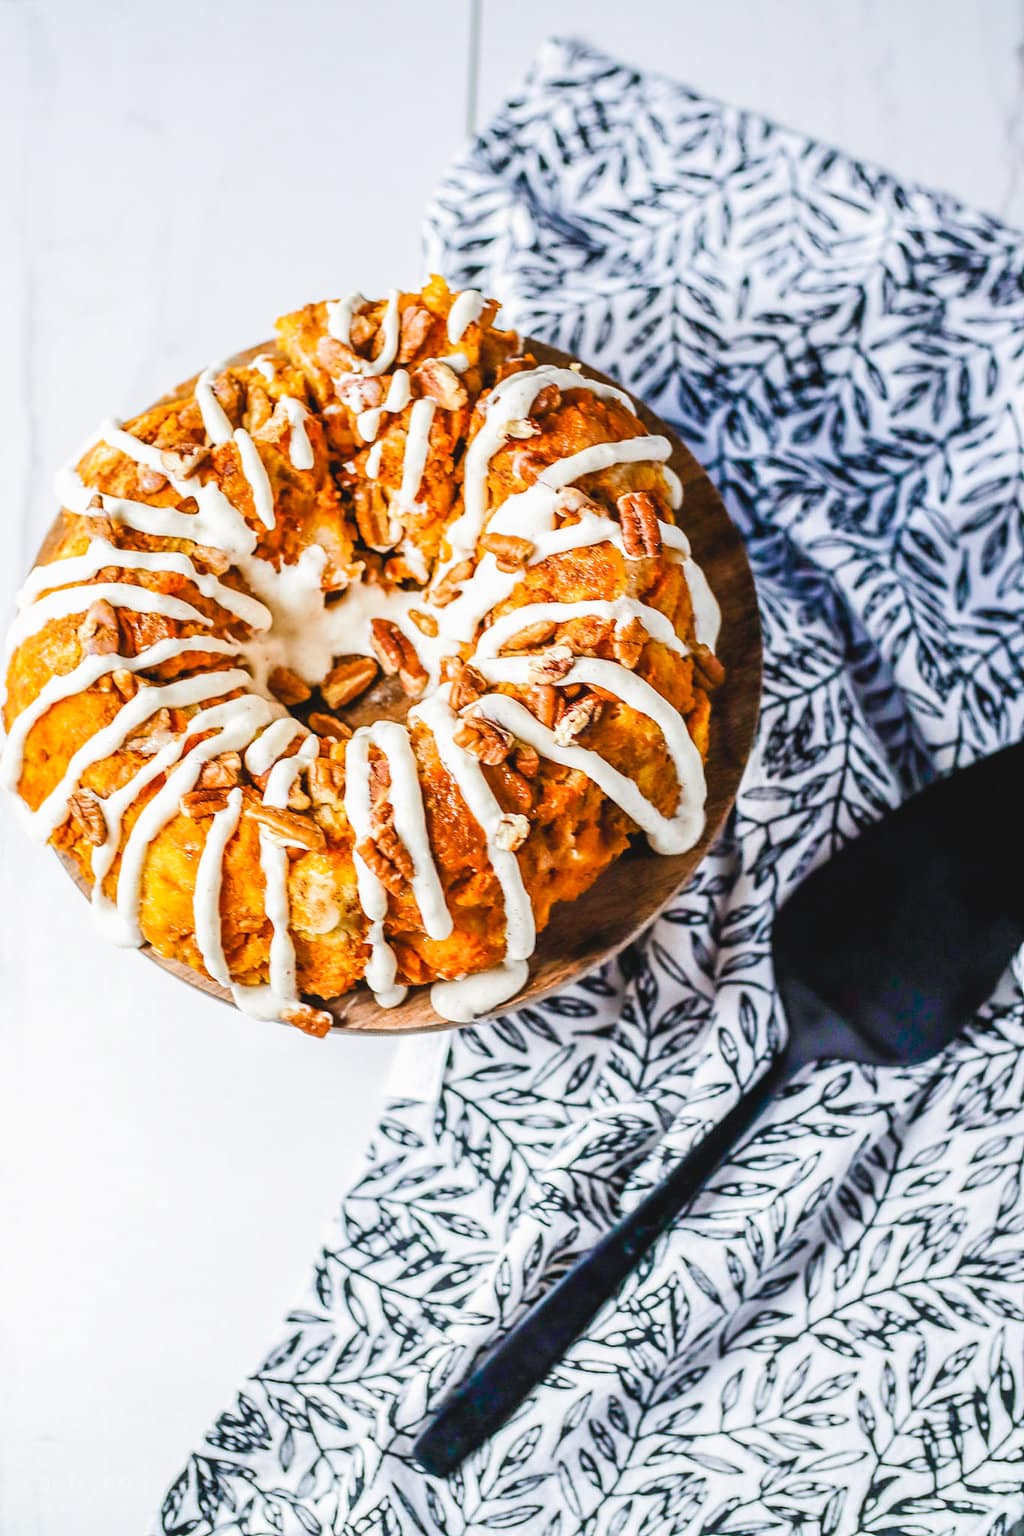 Overhead picture of golden brown monkey bread drizzled with a white frosting next to a blue and white tea towel.